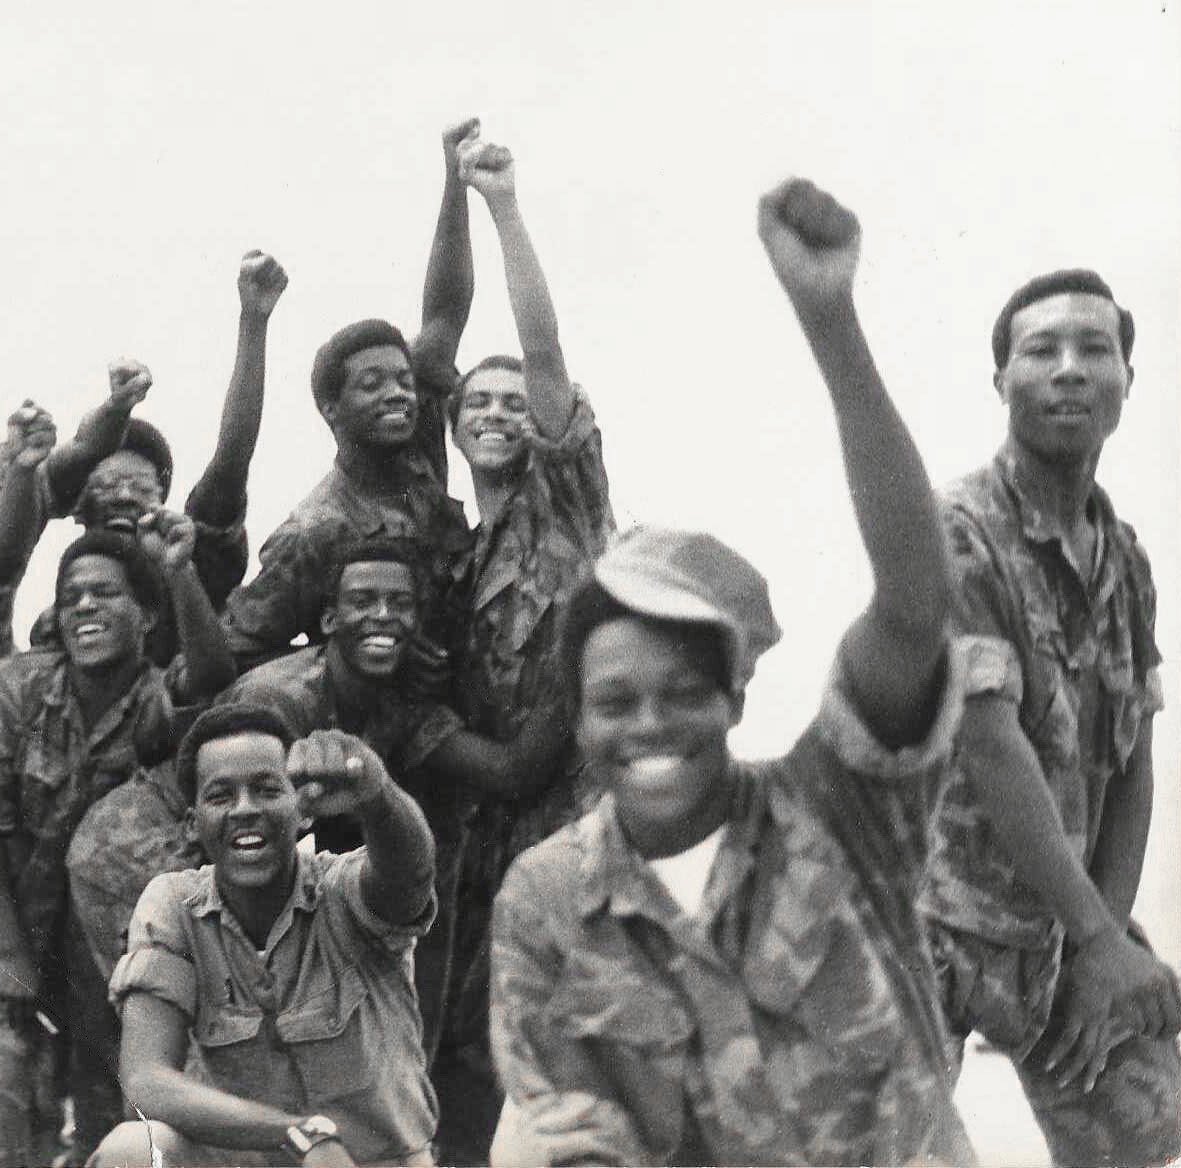 If you could make a movie about any event in Black history, what would you choose?I would tell the story of the riot at Long Binh Jail - an uprising of incarcerated Black service members during the Vietnam War. (Thread)